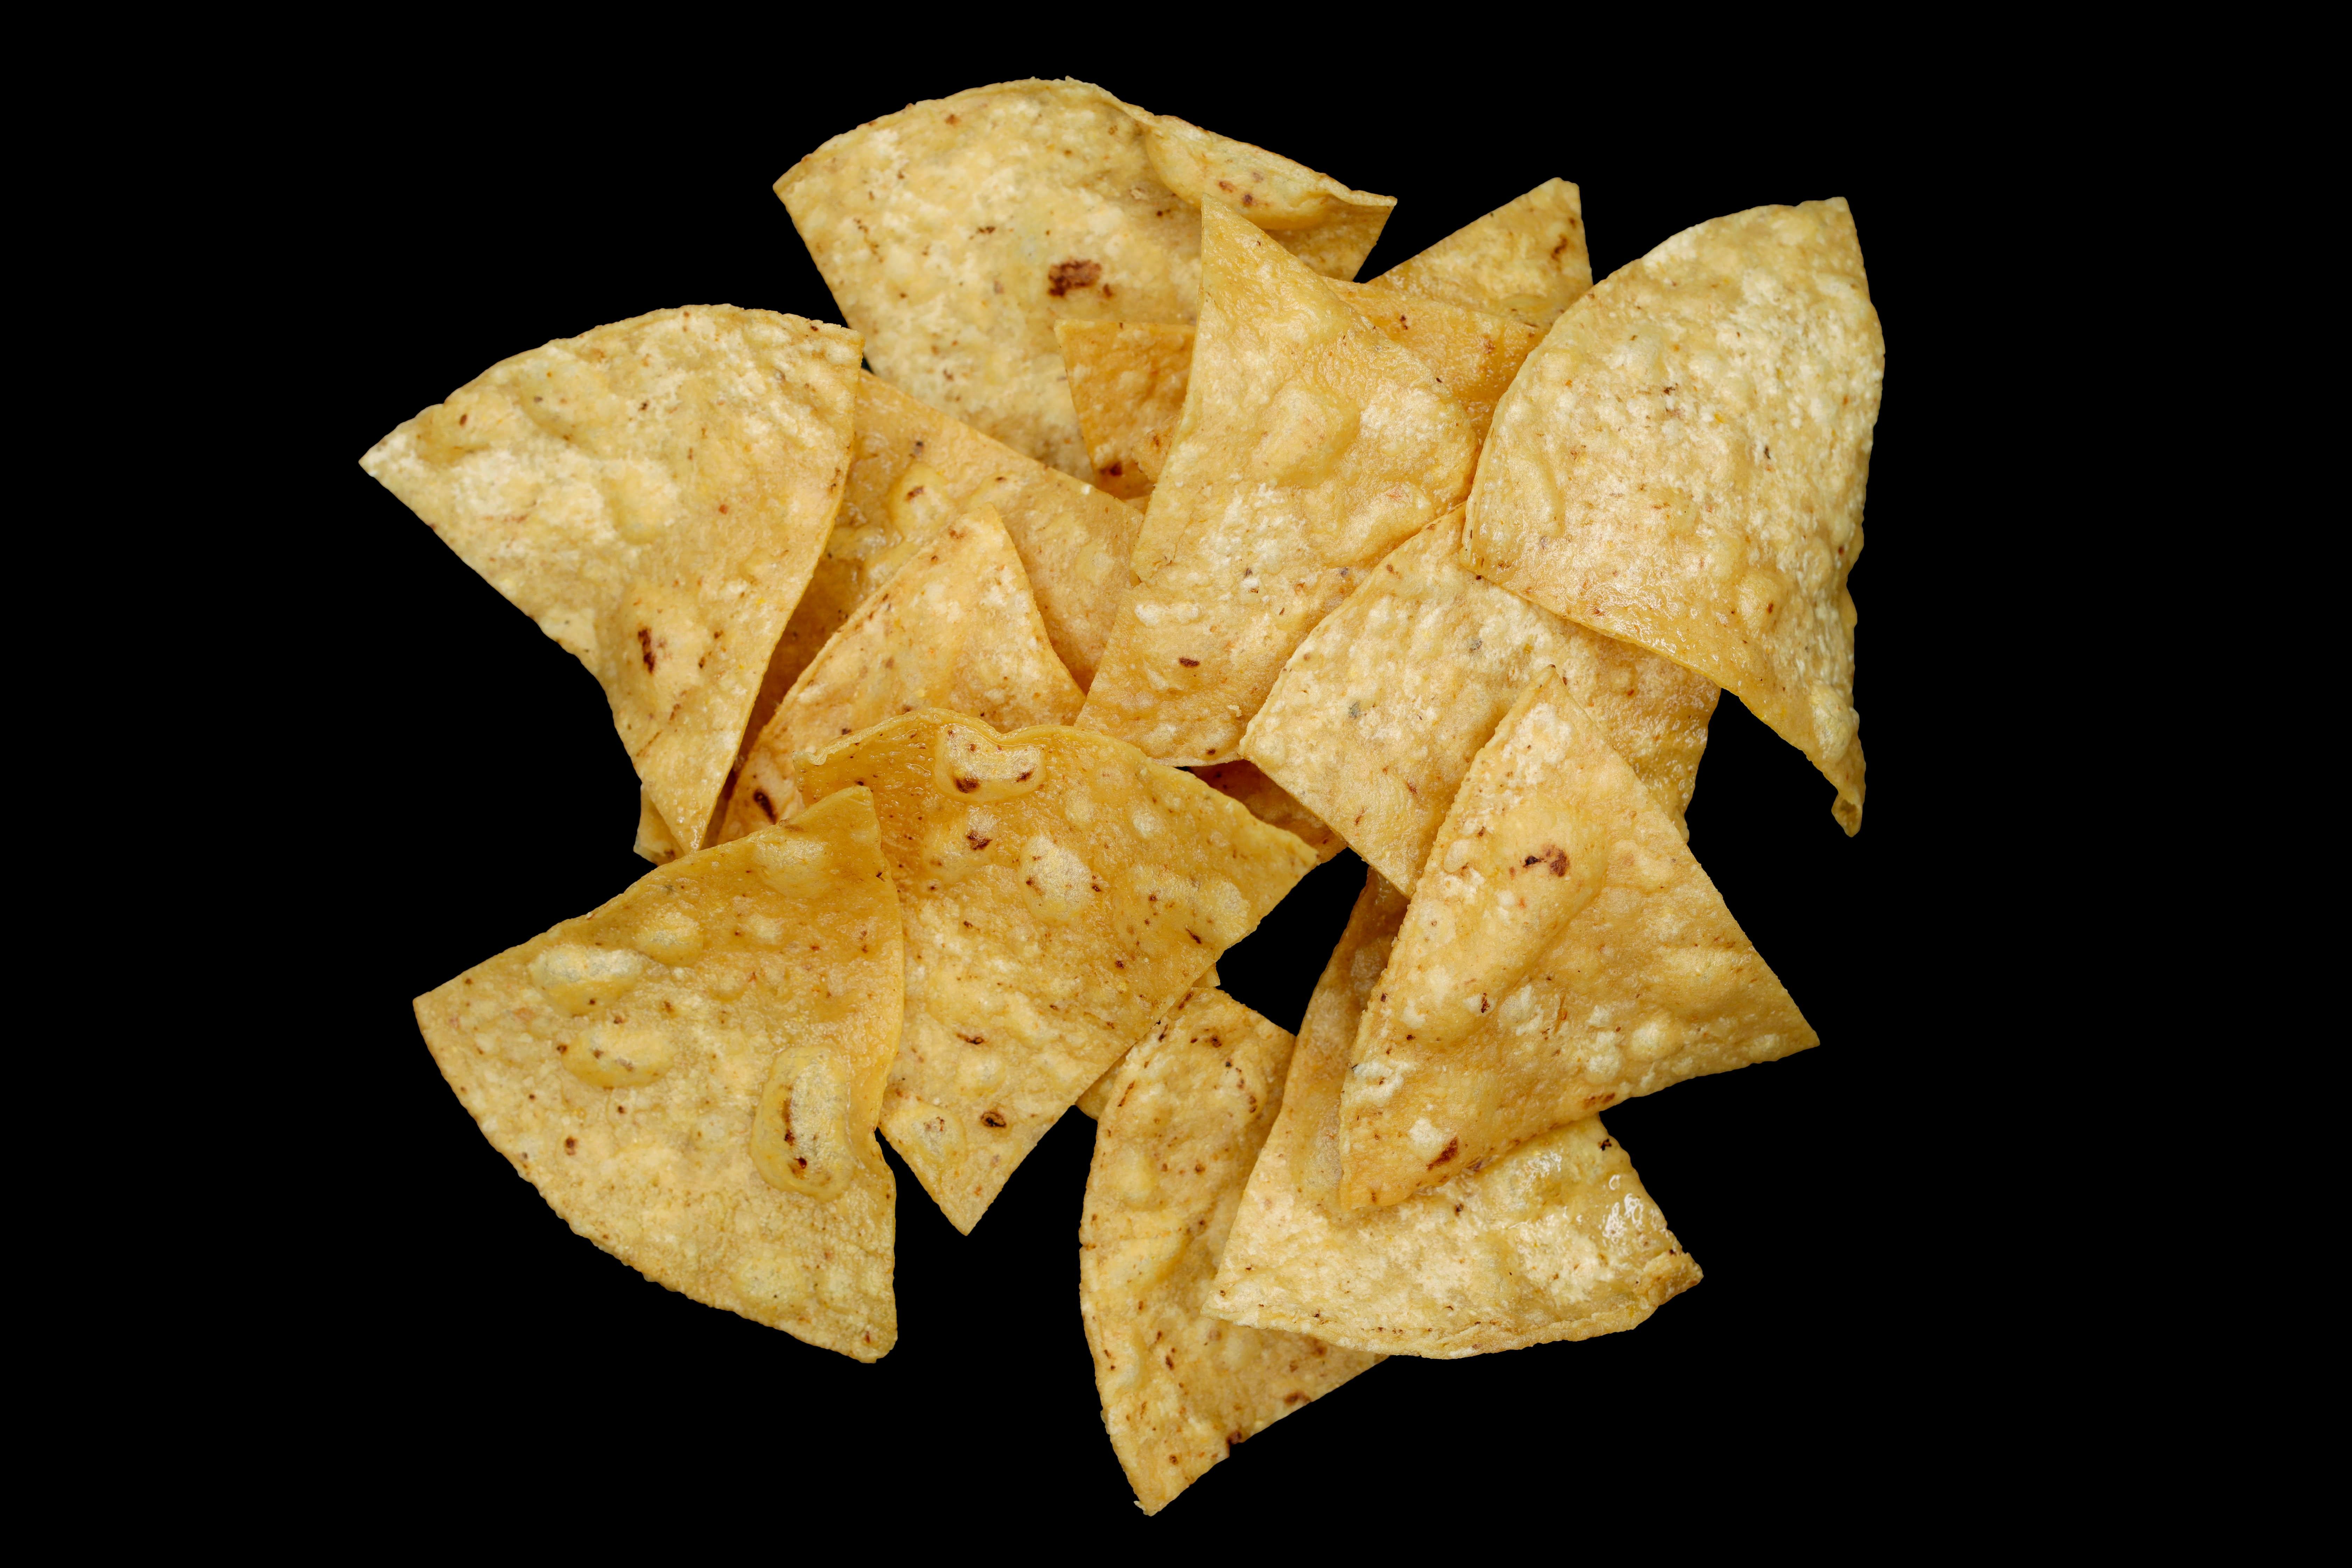 Chips (10 bags)